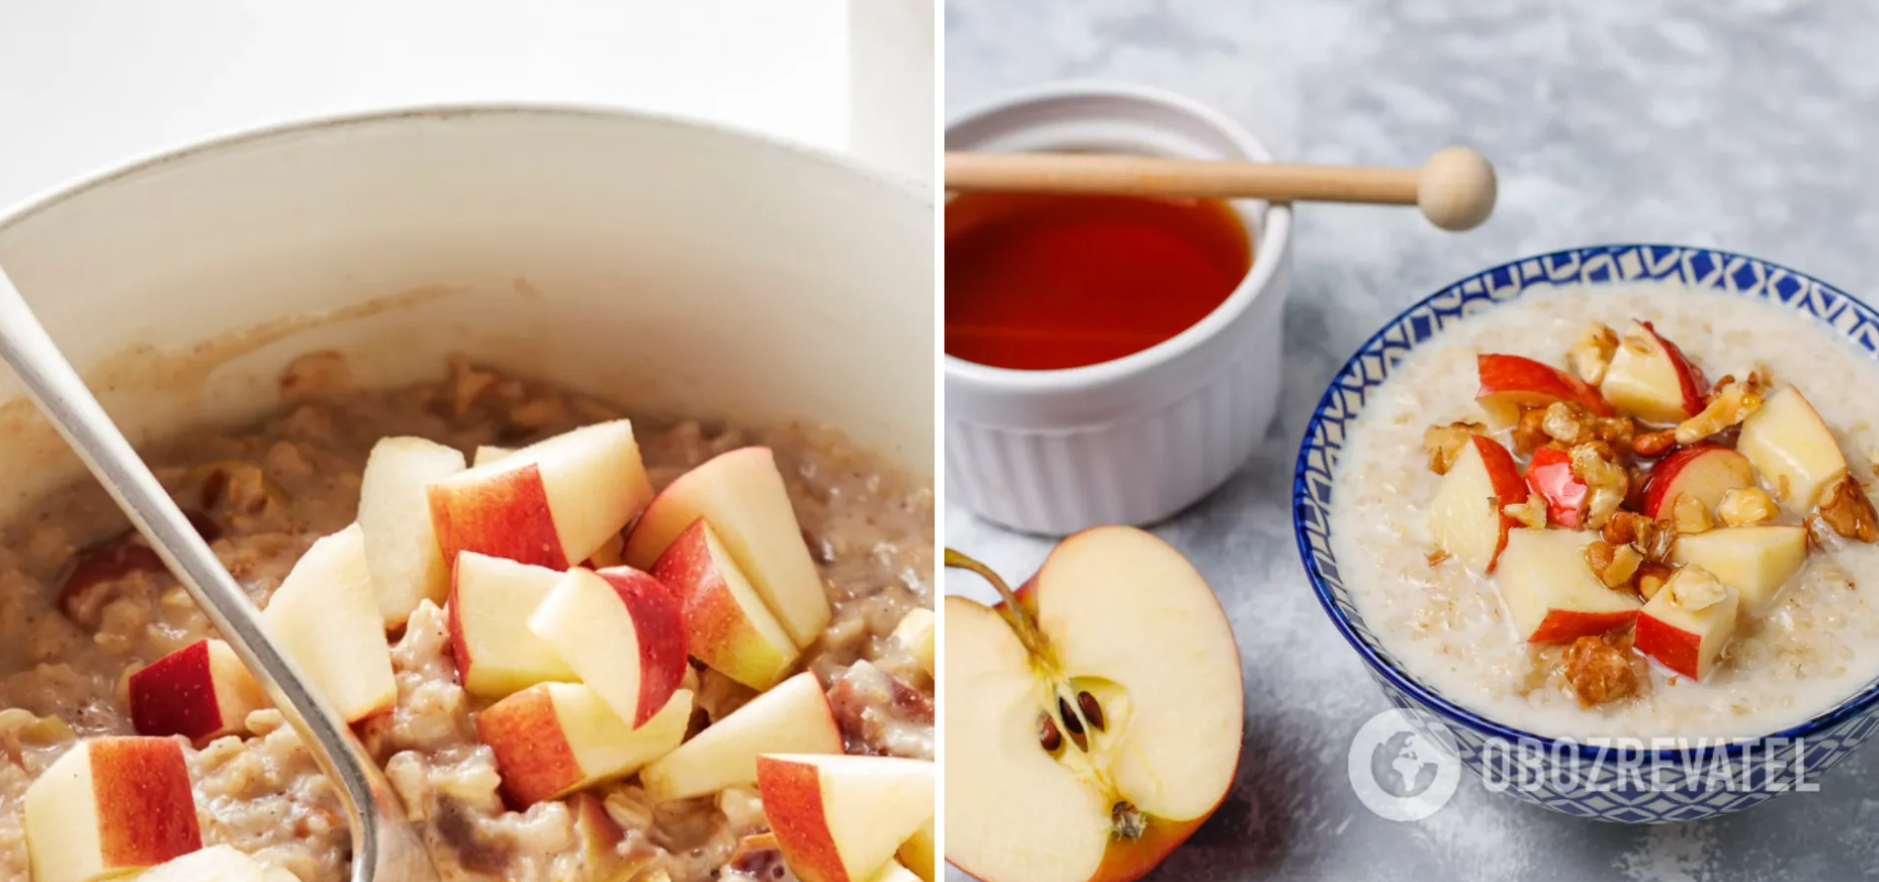 Oatmeal will not be tasty and healthy: how not to cook it properly